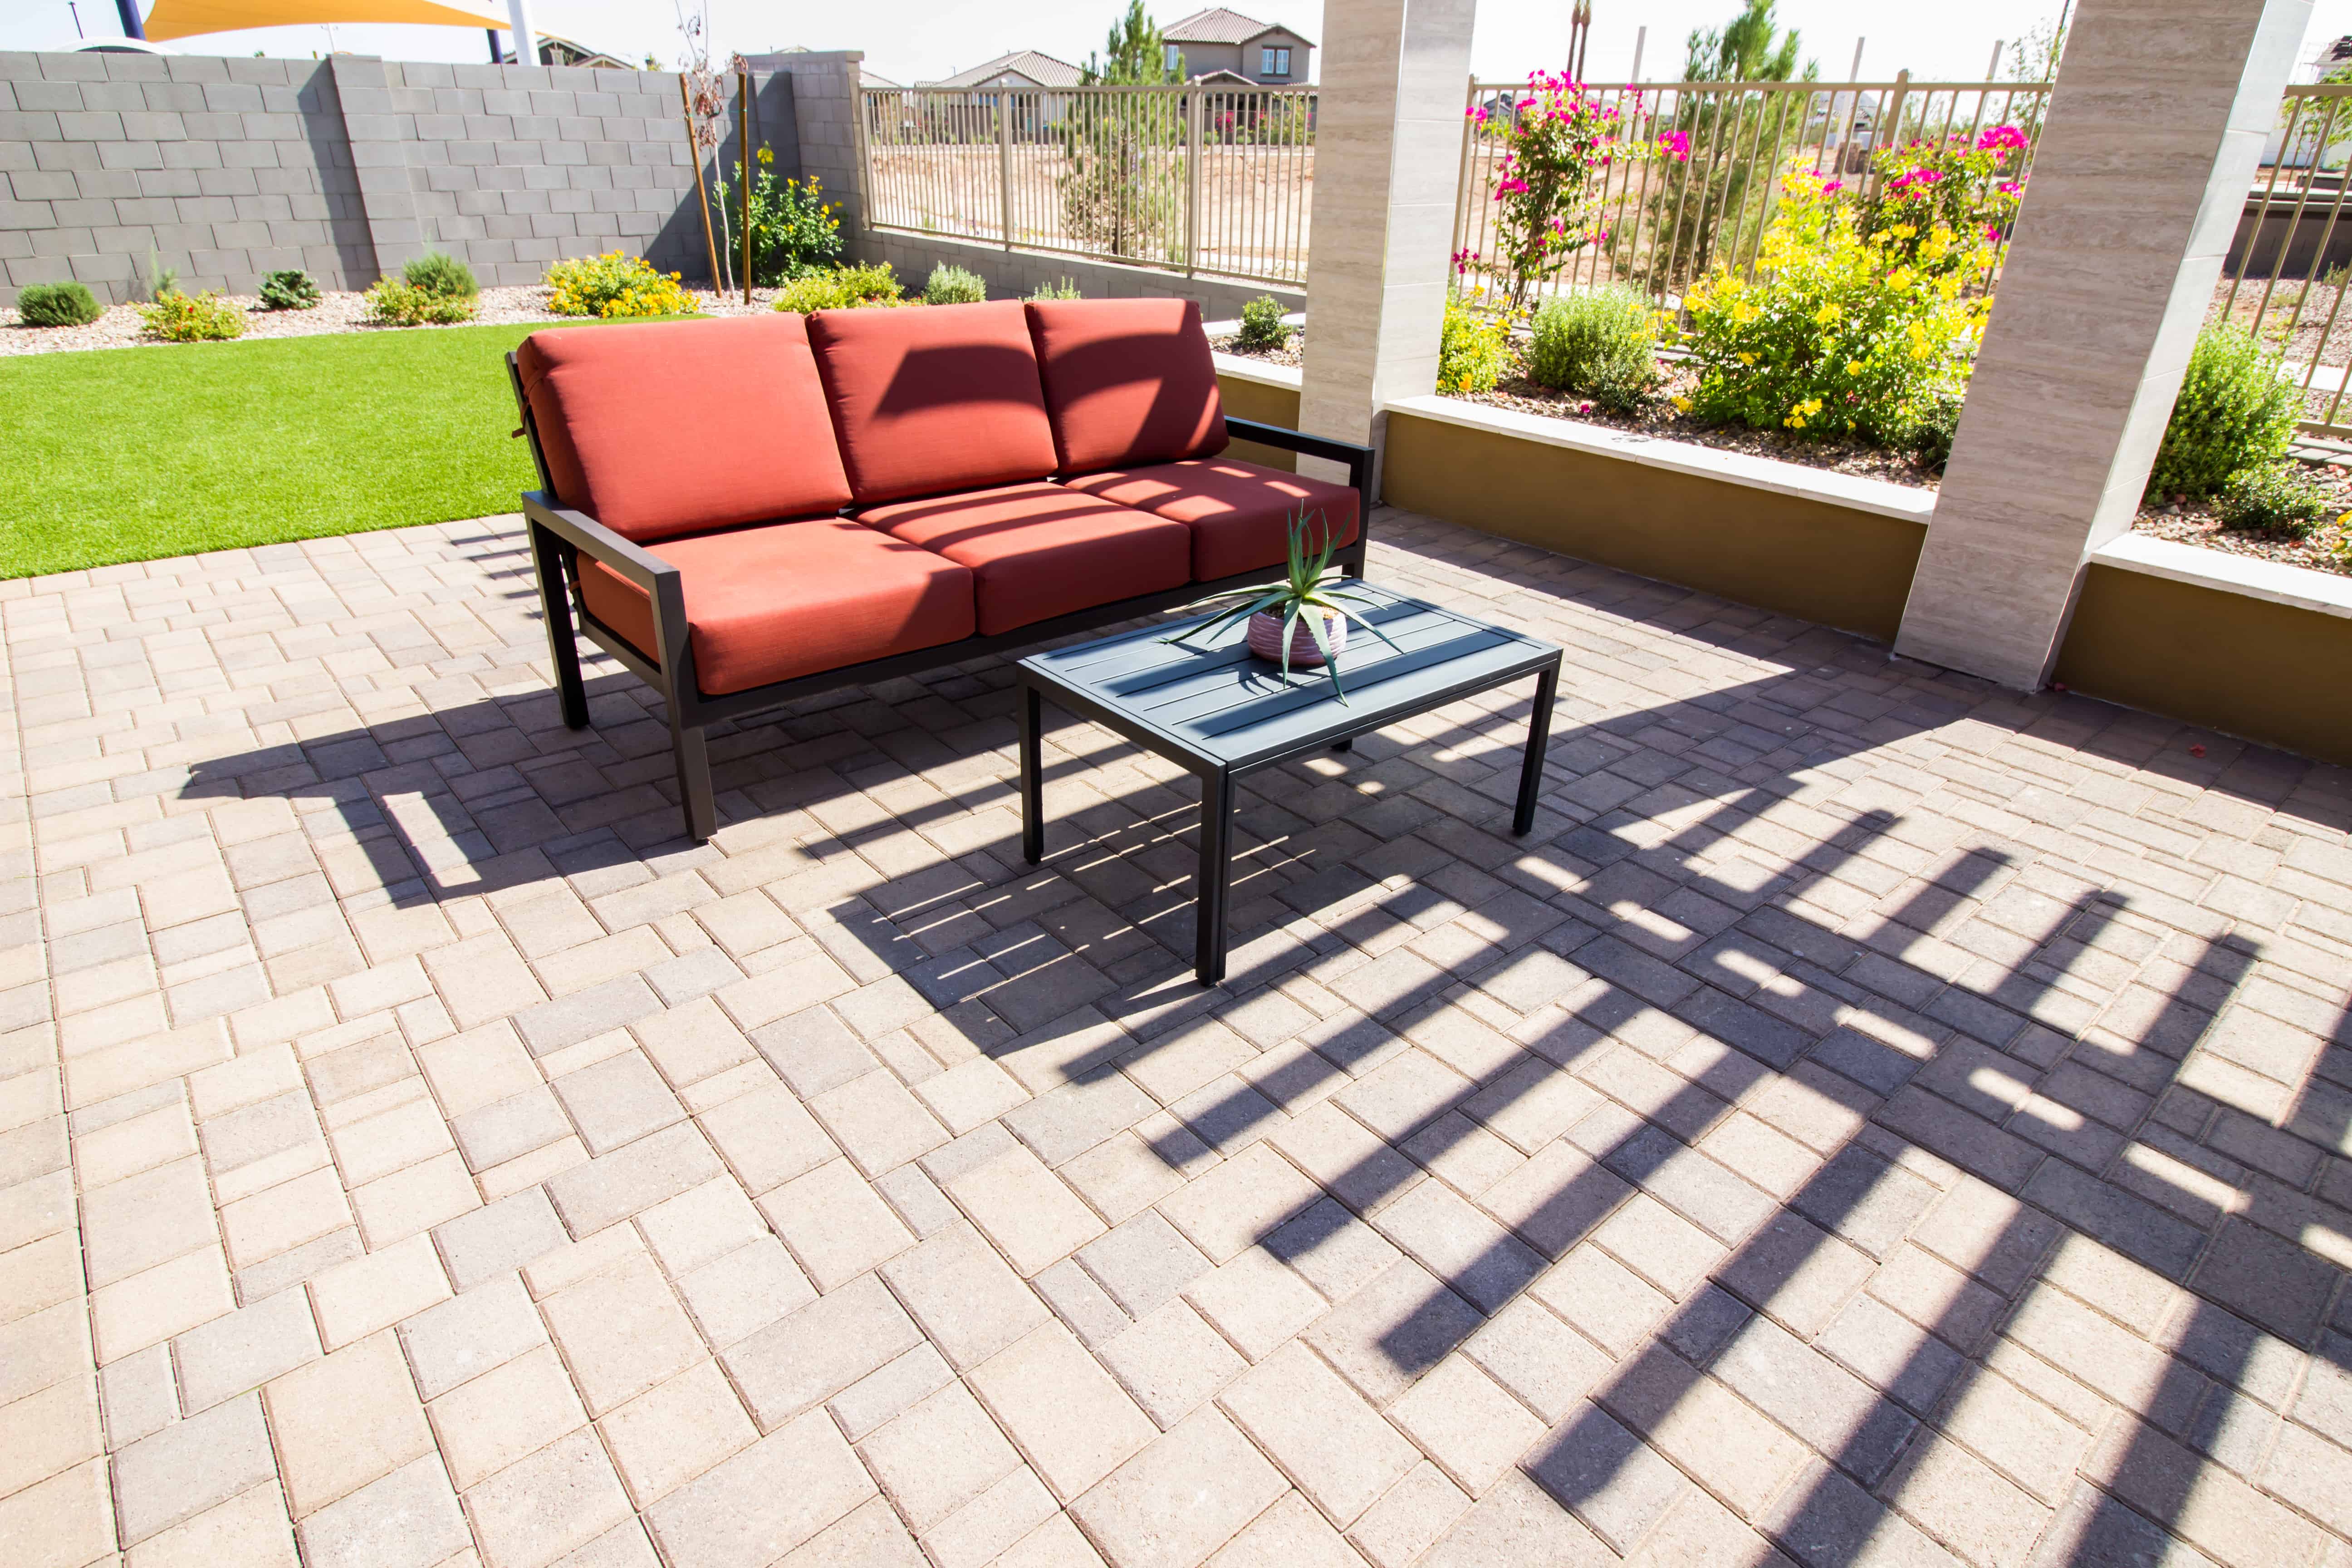 Elevate your patio design with Lawns & Beyond; contact us today for classic to unique paver patterns.
